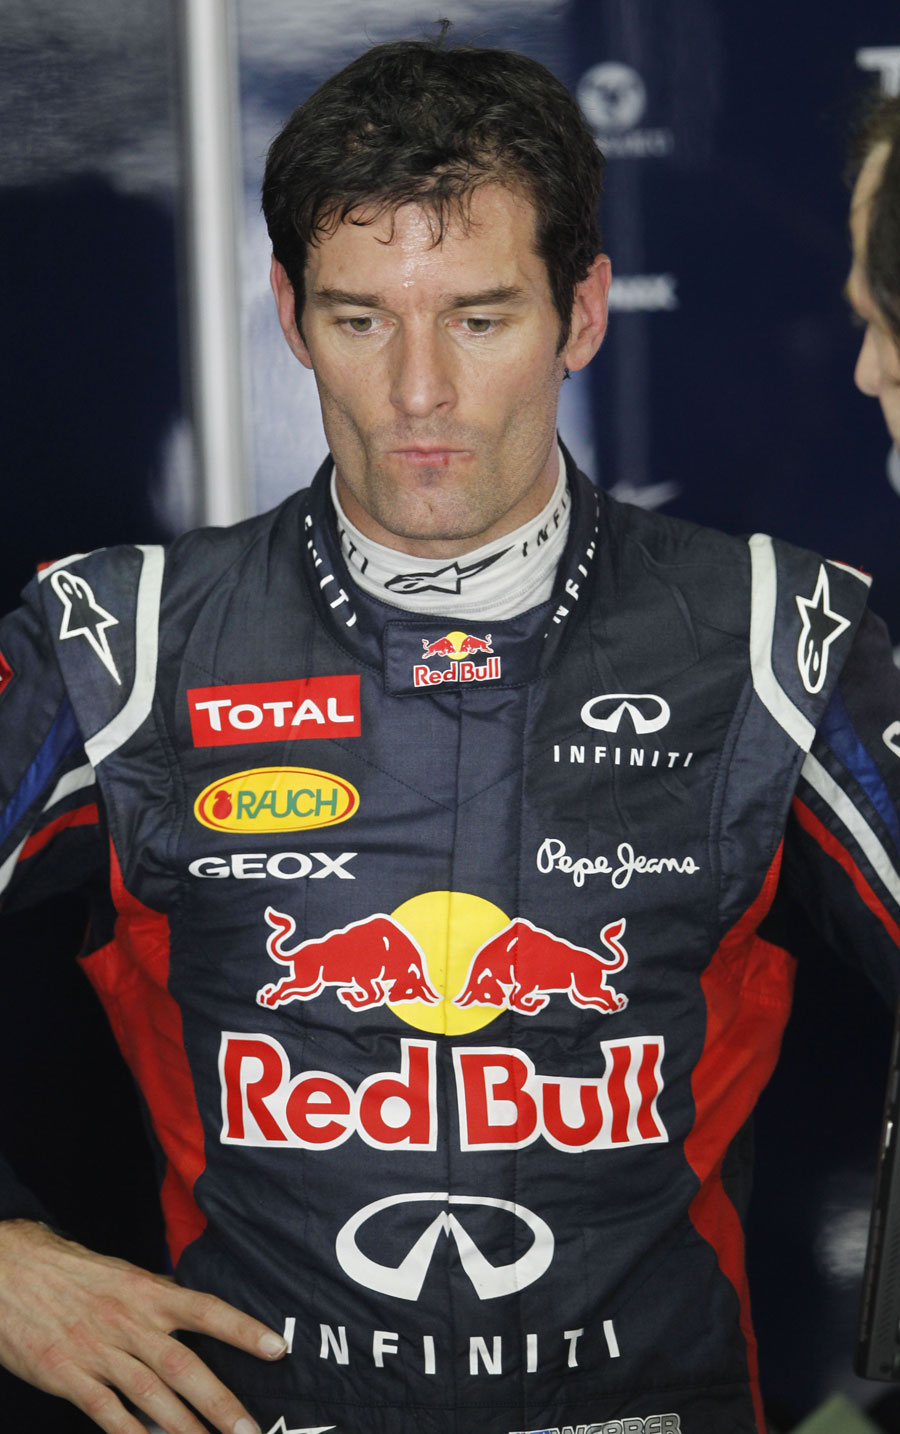 Mark Webber deep in thought in the Red Bull garage